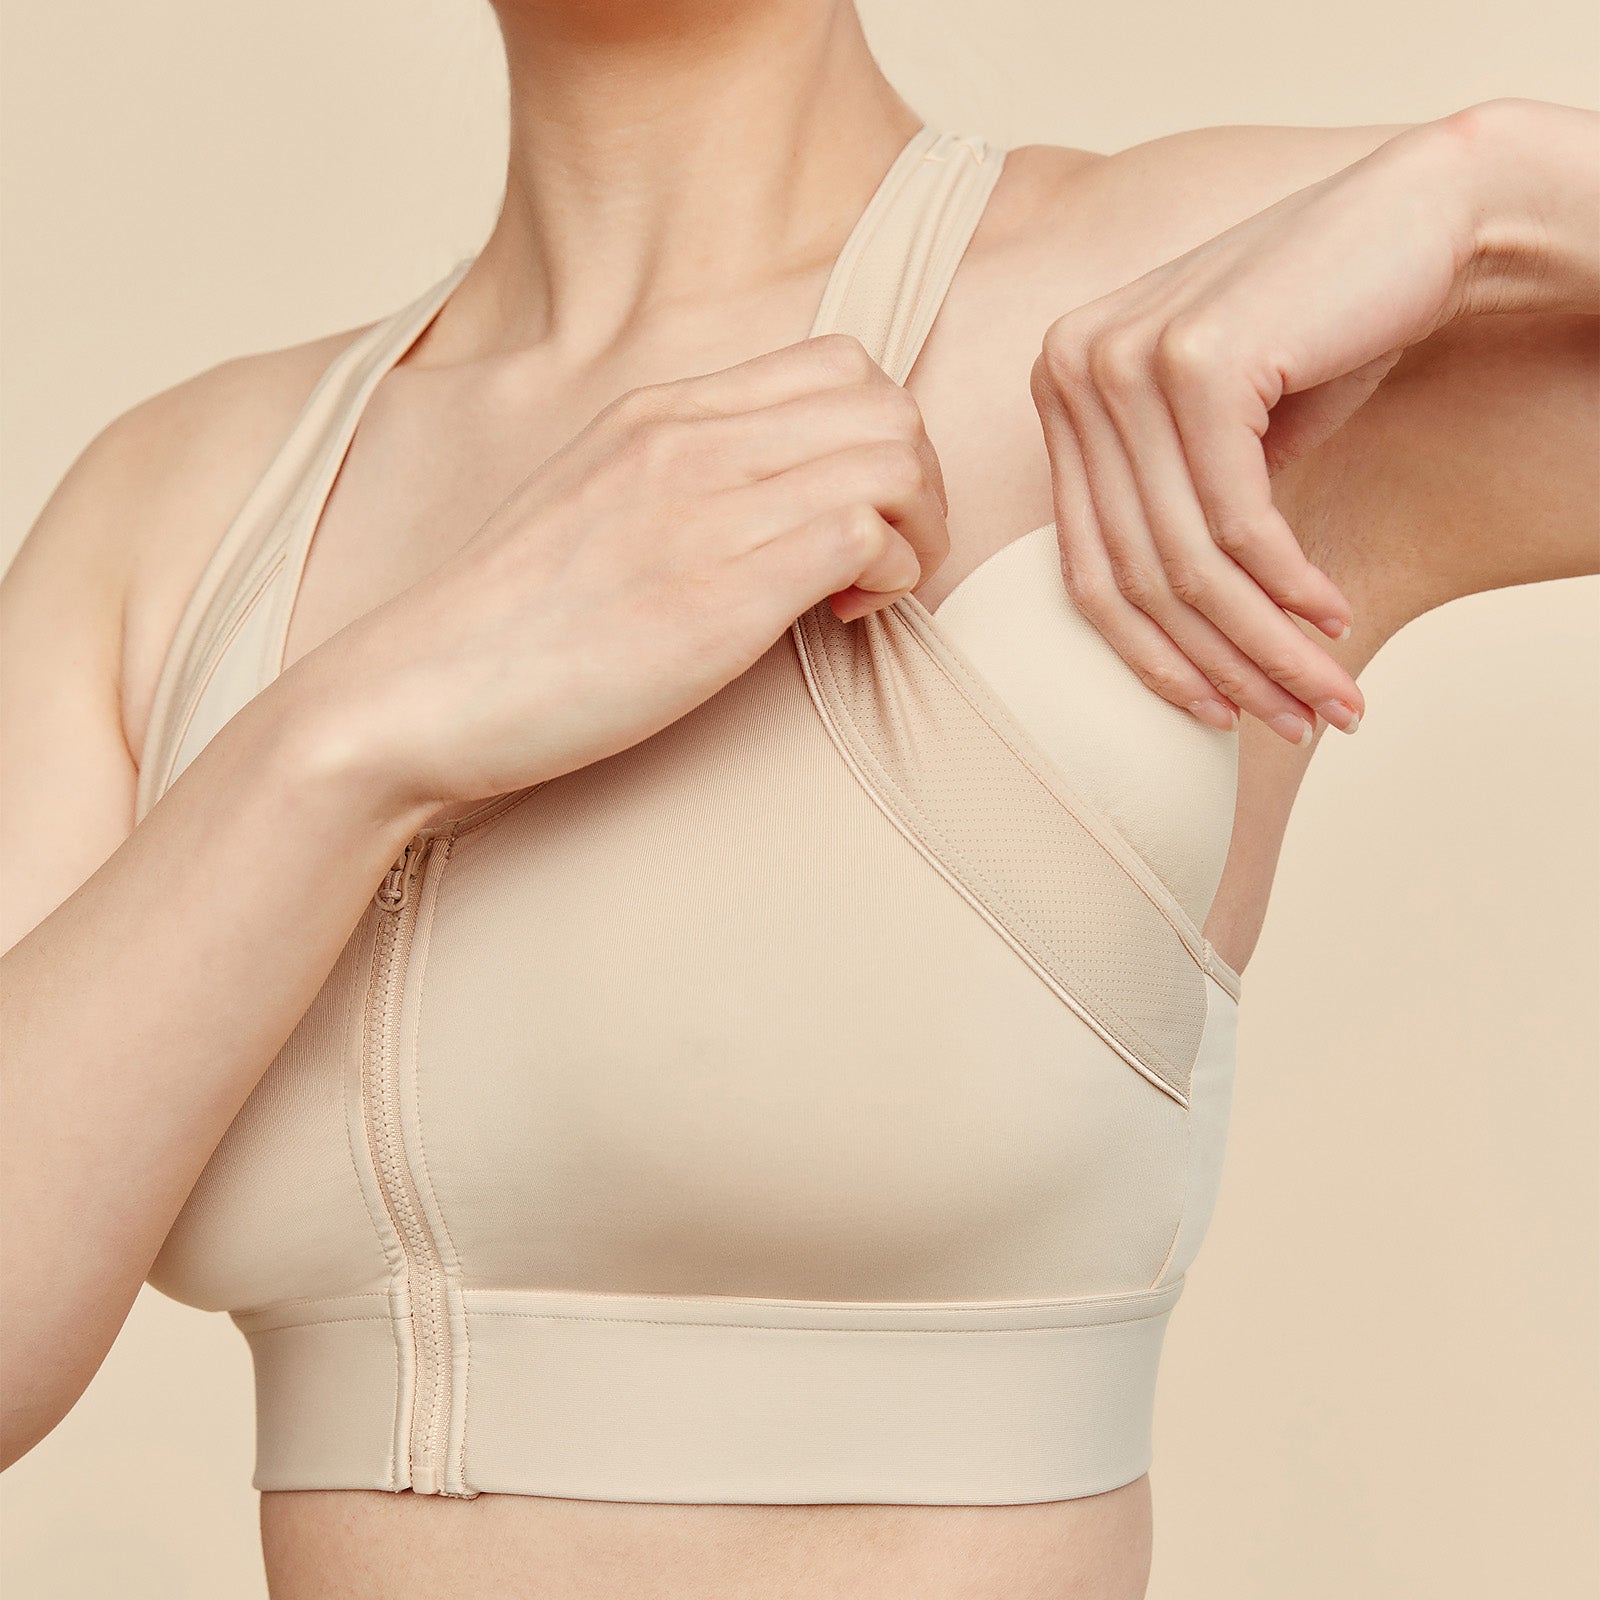 Picture of Model Inserting Breast Form into Sports Bra Pocket